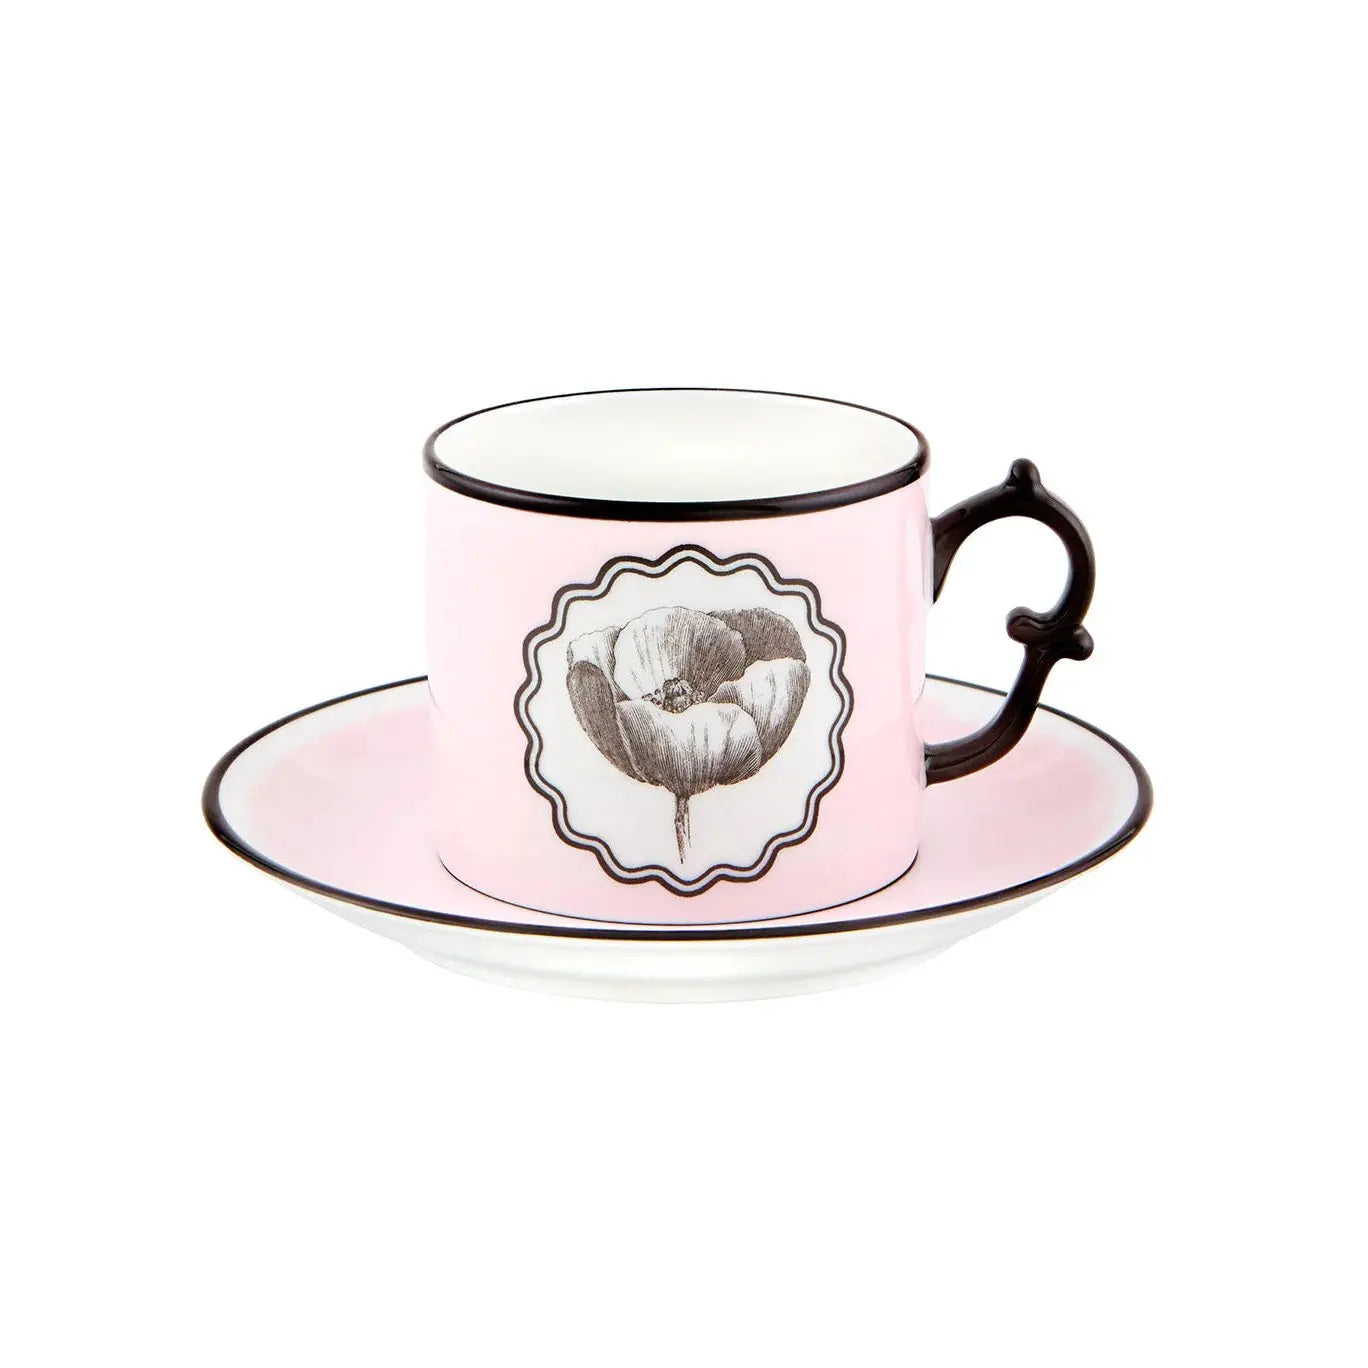 Vista Alegre Christian Lacroix Herbariae Pink Tea Cup and Saucer